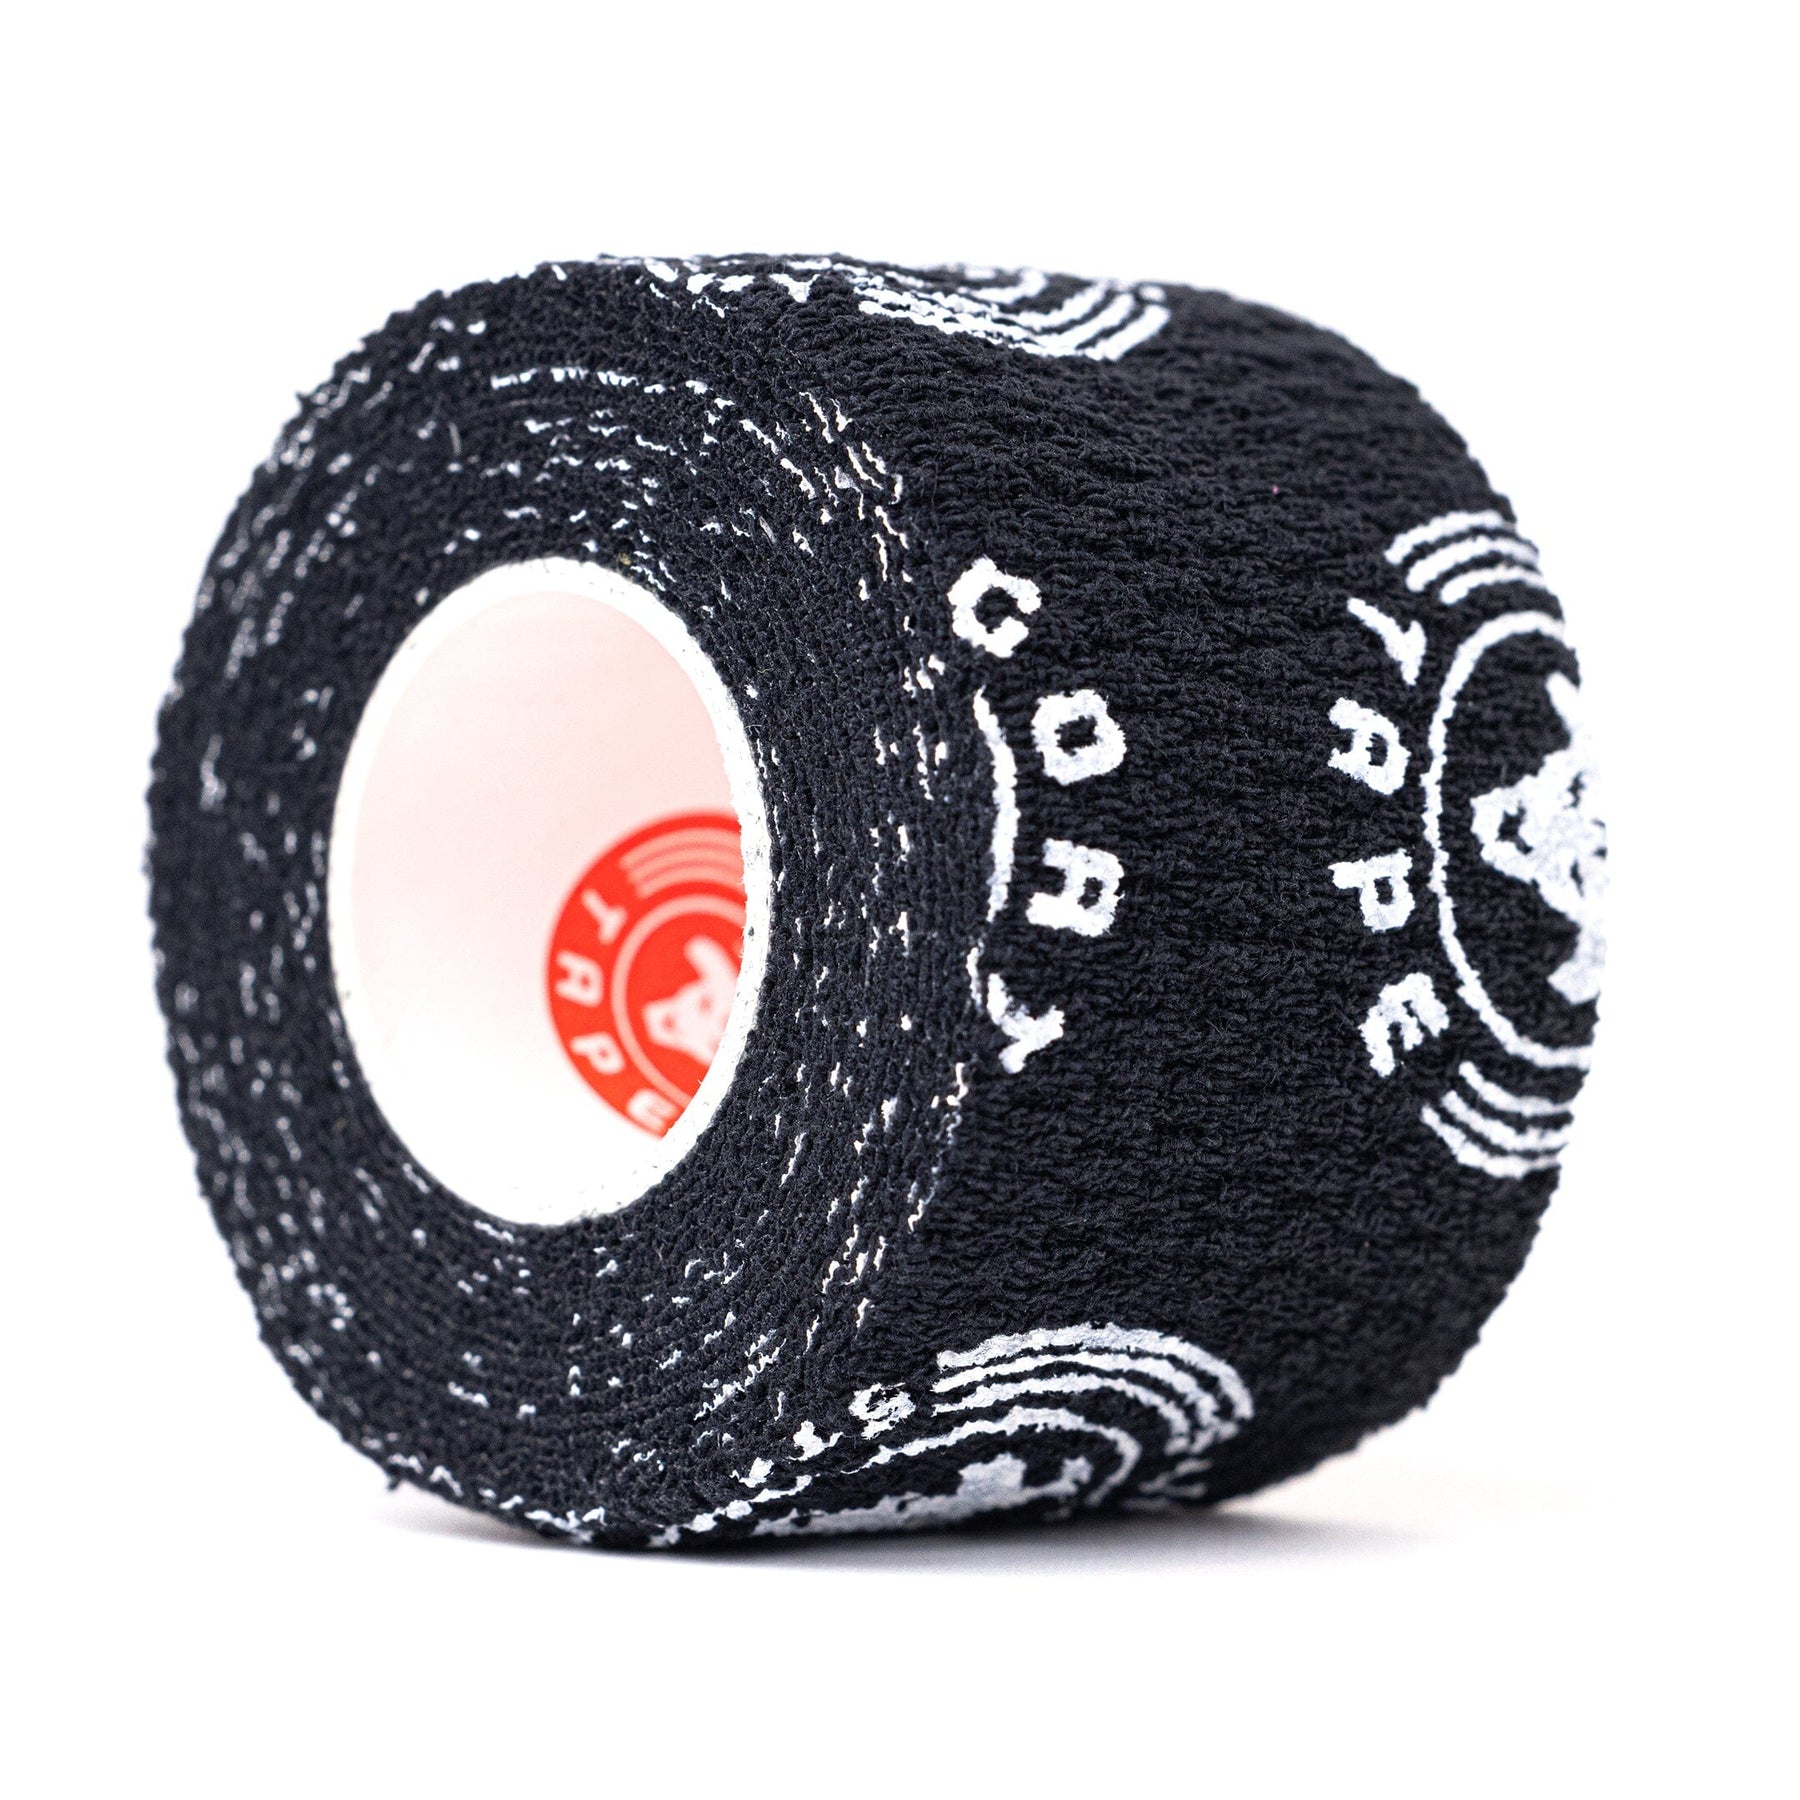 Goat Tape Super Stretchy Thumb Tape - Weightlifting Hook Grip Tape & WOD  Tape for Cross Training, Gym Workout Tape, Athletic Finger Wrap - Flexes  with